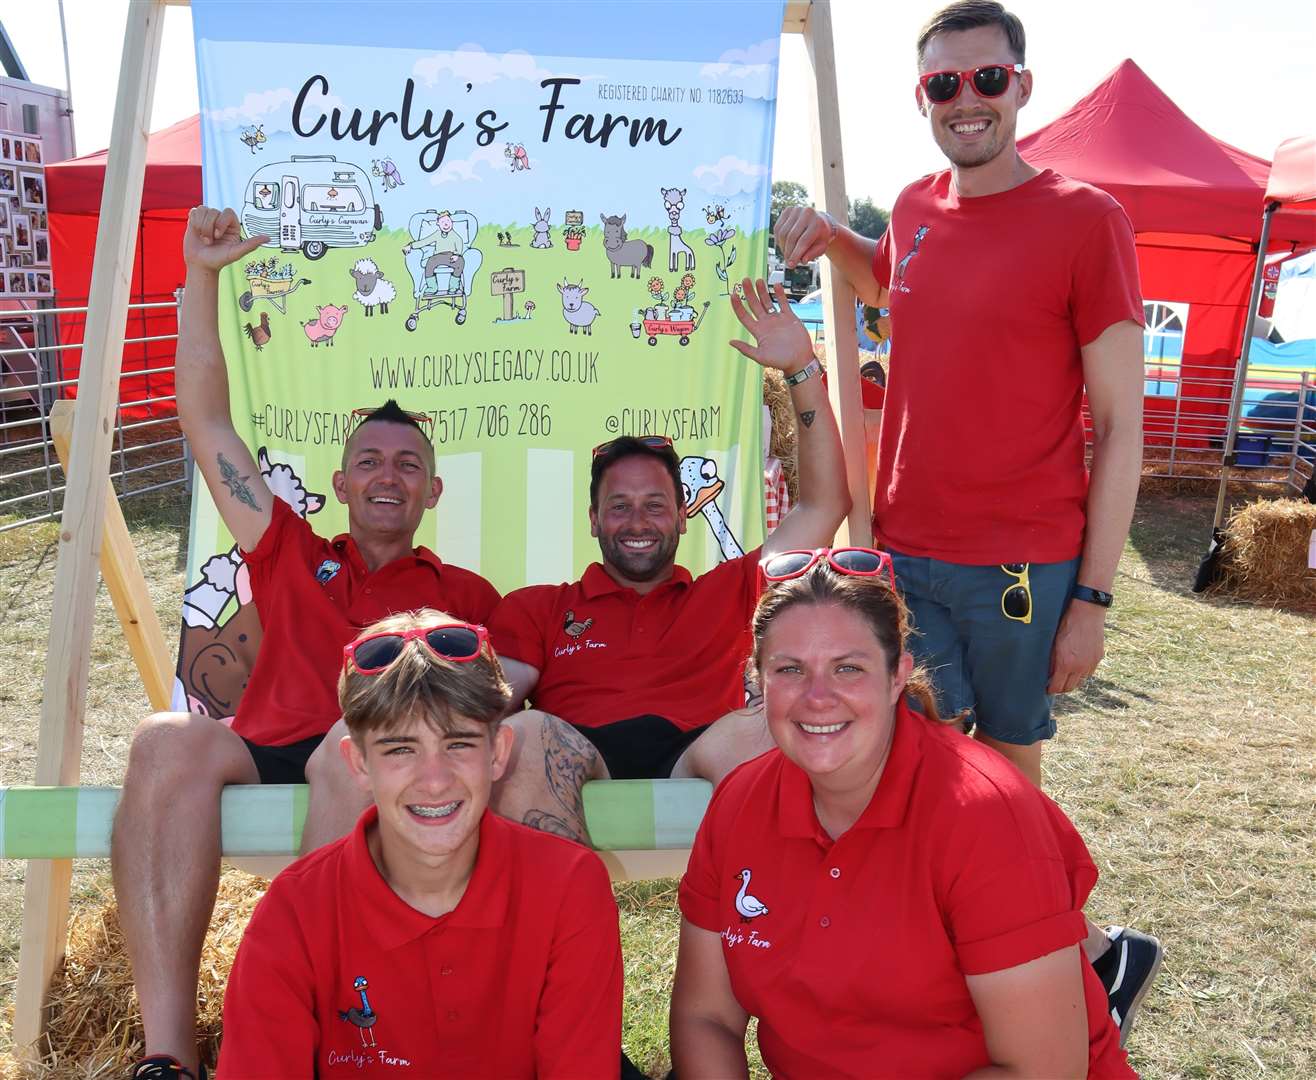 Curly's Farm from Sheppey at this year's Kent County Show